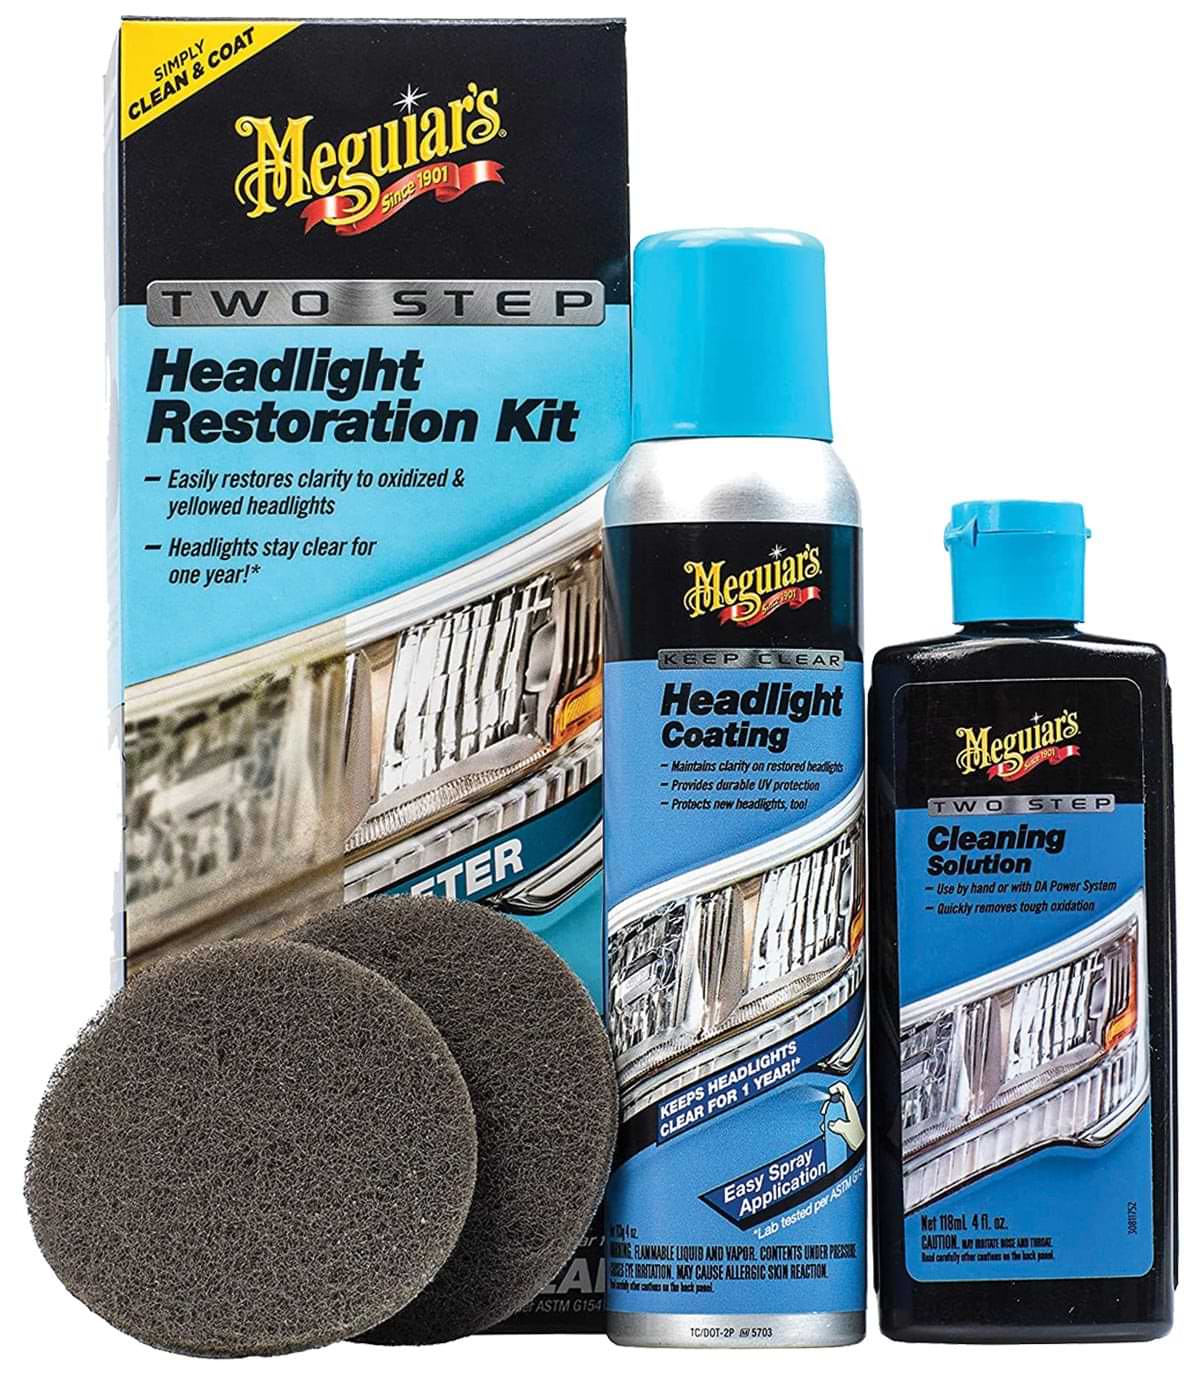 Two Step Headlight Restoration Kit parts, including 3 containers and two abrasive cleaning pads